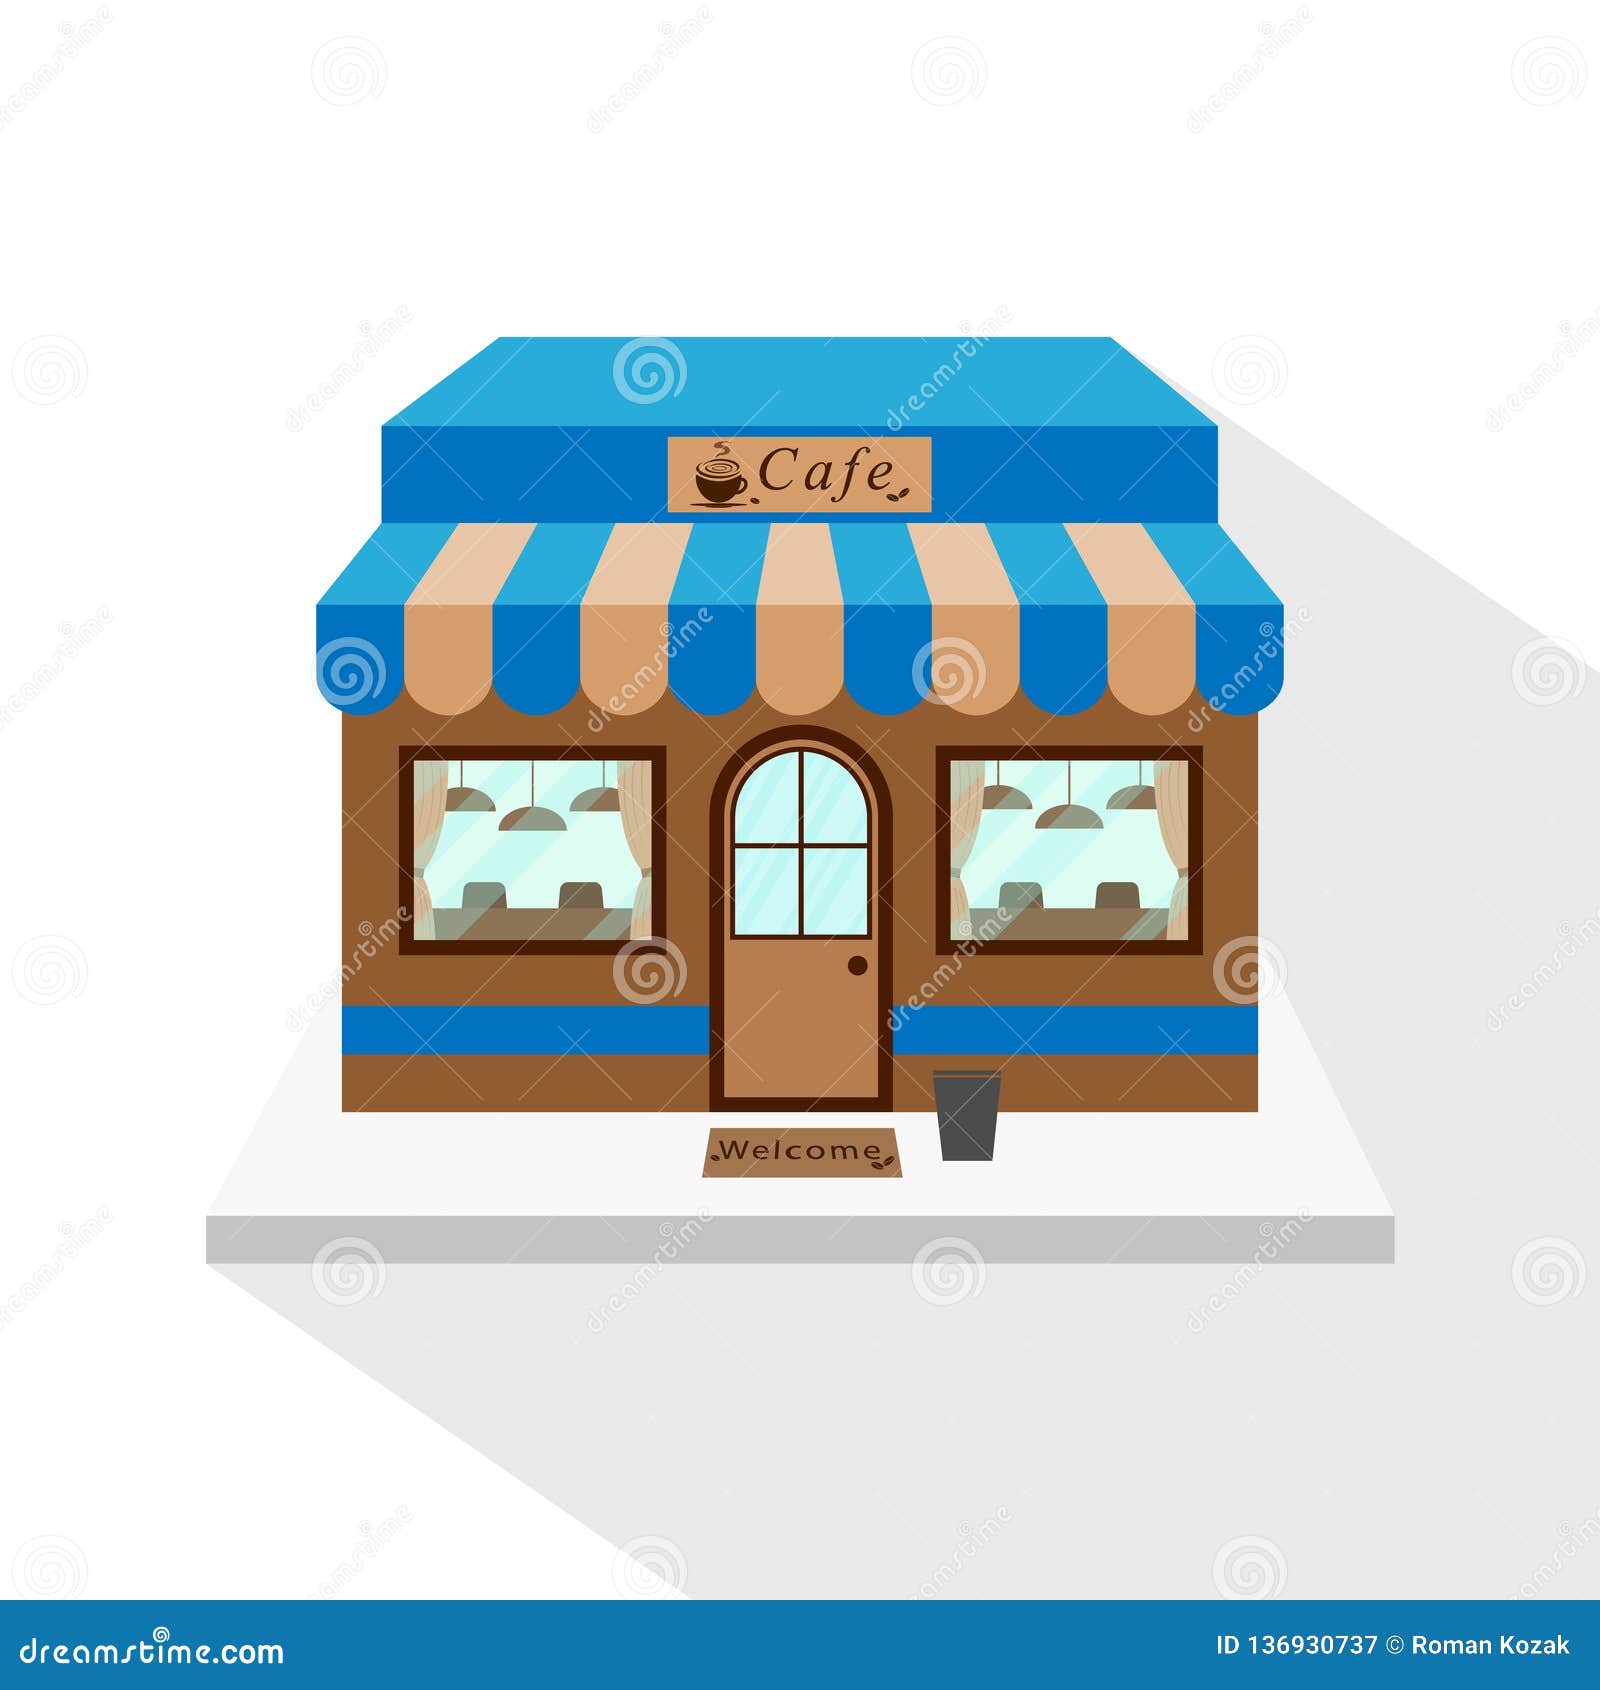 cafe icon with long flat shadow on white background